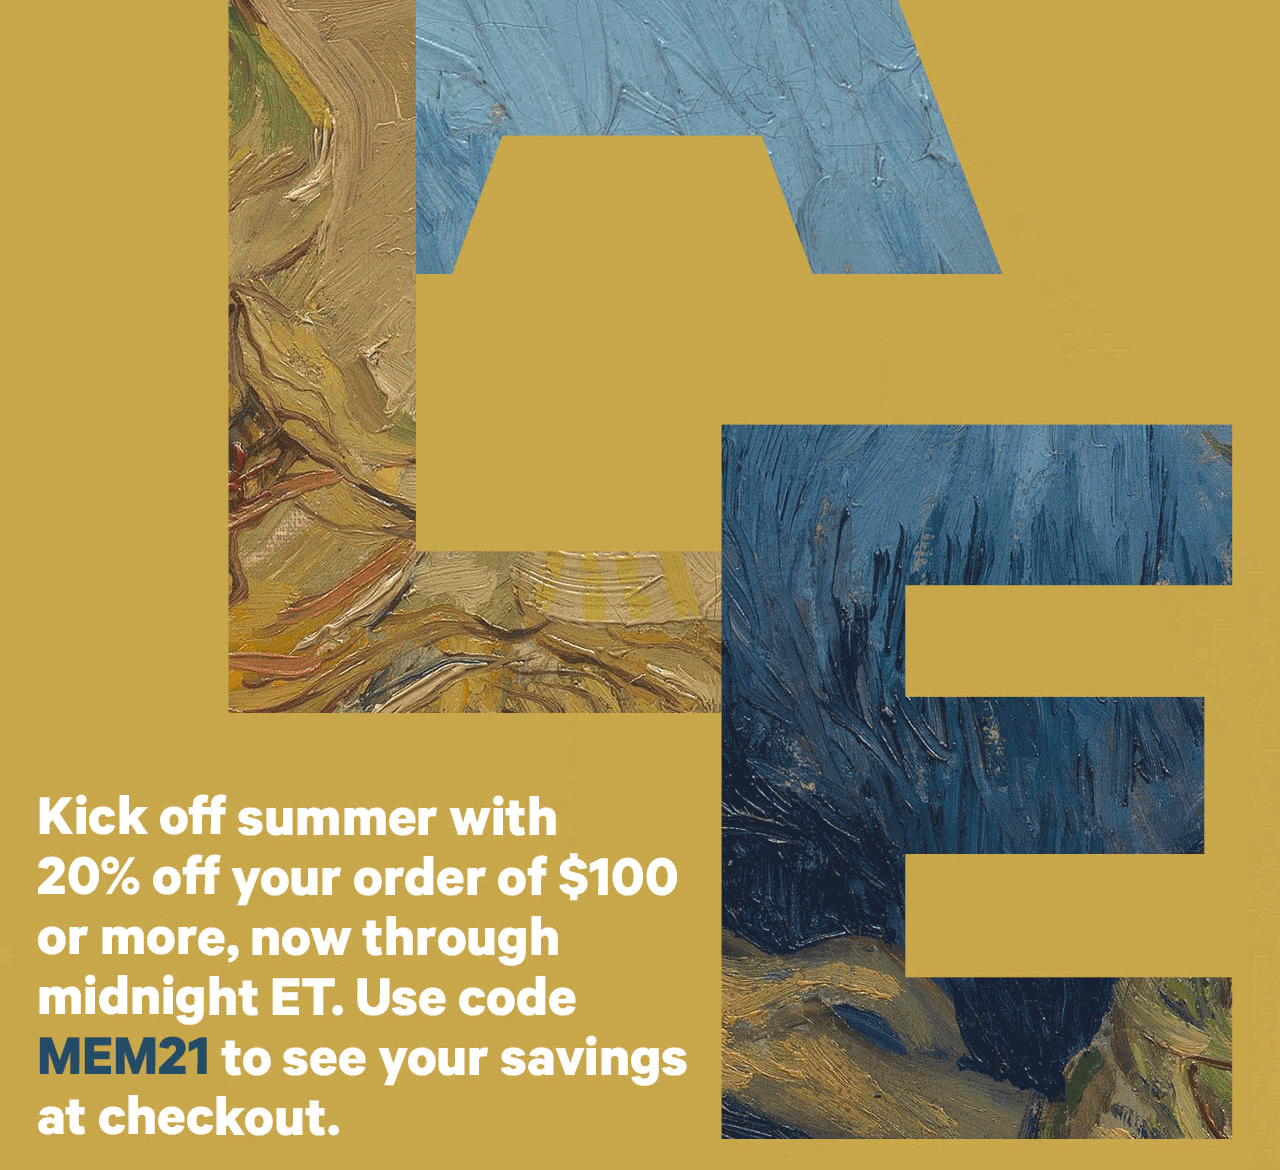 Kick off summer with 20% off your order of $100 or more, now through midnight ET. Use code MEM21 to see your savings at checkout.